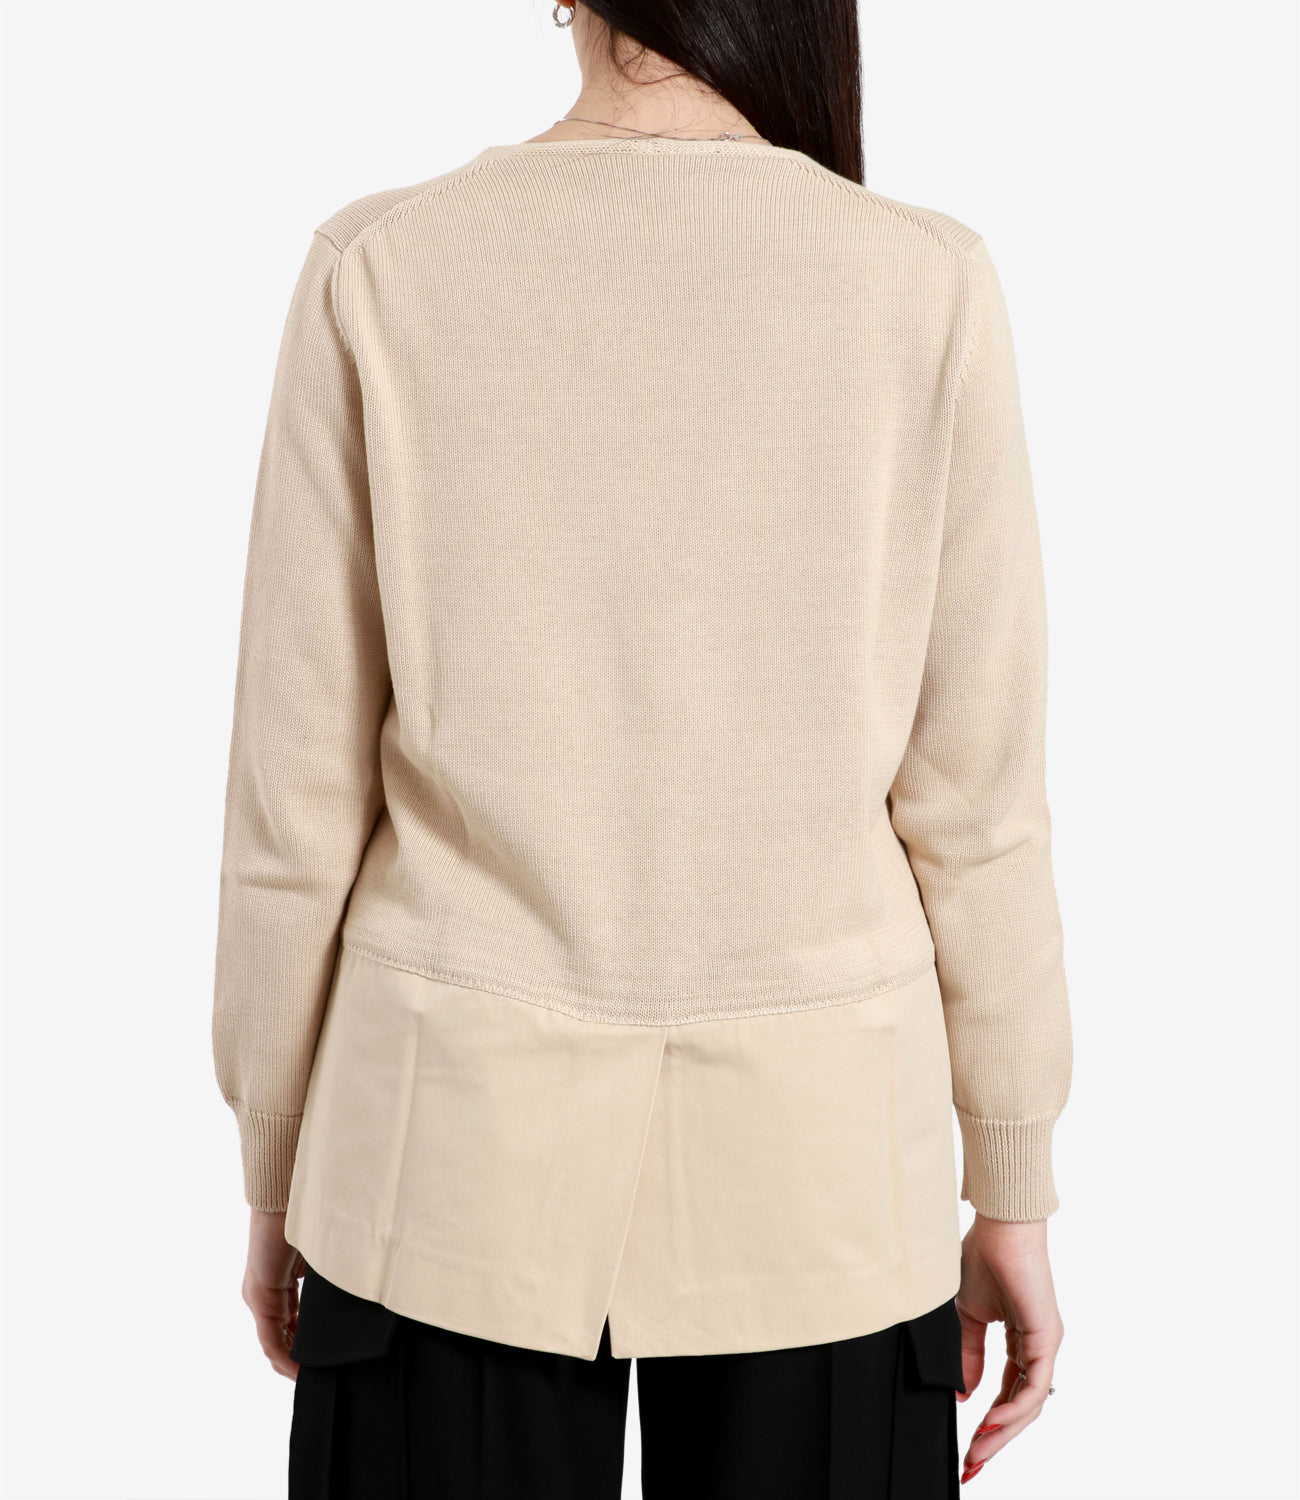 Semicouture | Mely Camel Jacket